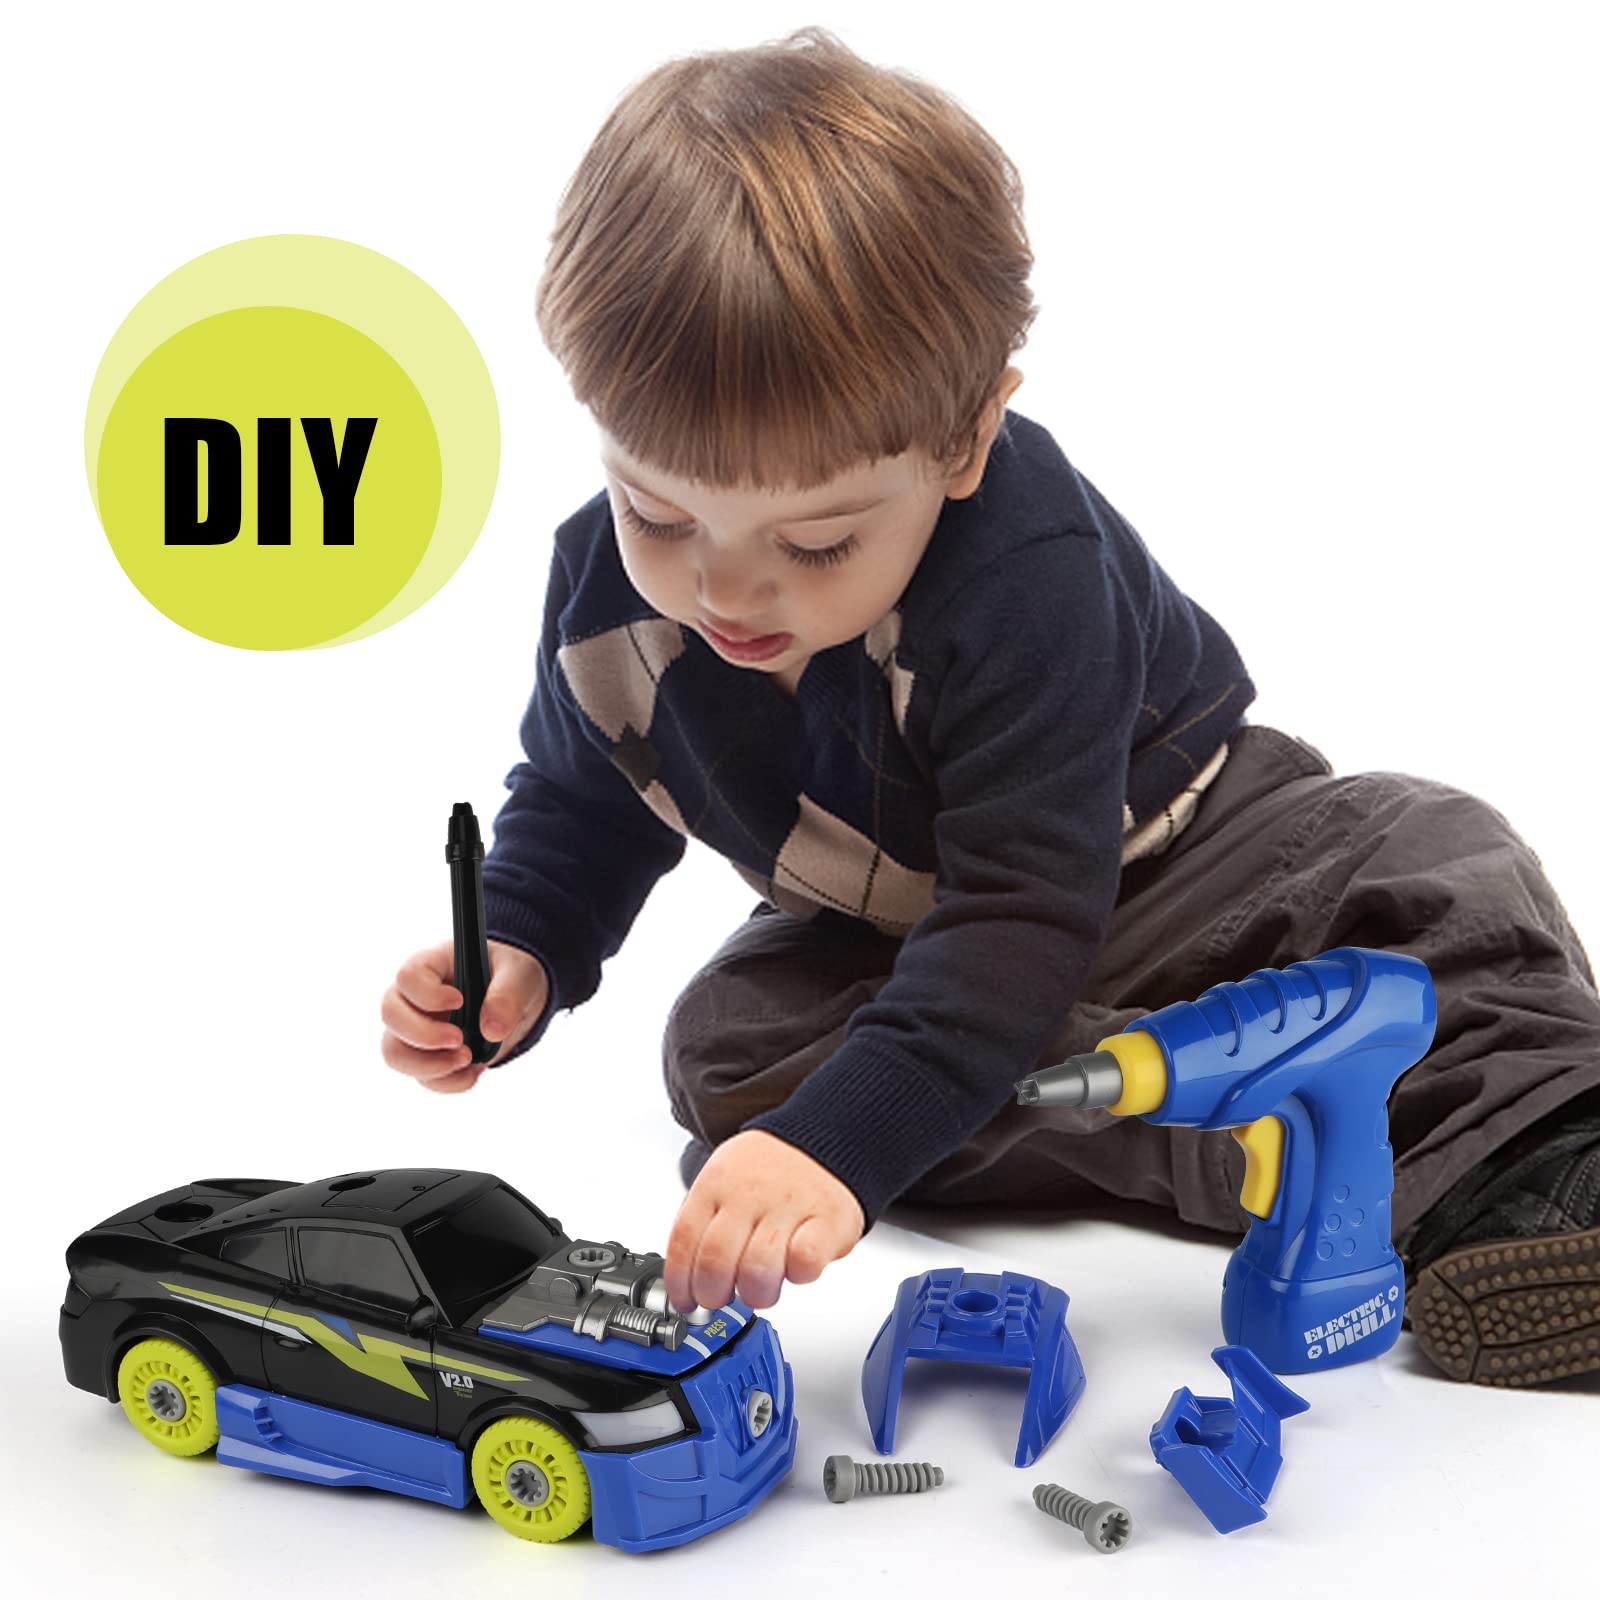 GILOBABY 26 Pieces Take Apart Car Toys Set, Build Your Own Racing Car with Drill, Sounds & Lights, Learning Education Toys for Kids, Birthday Gifts for Boys Ages 3+ Years